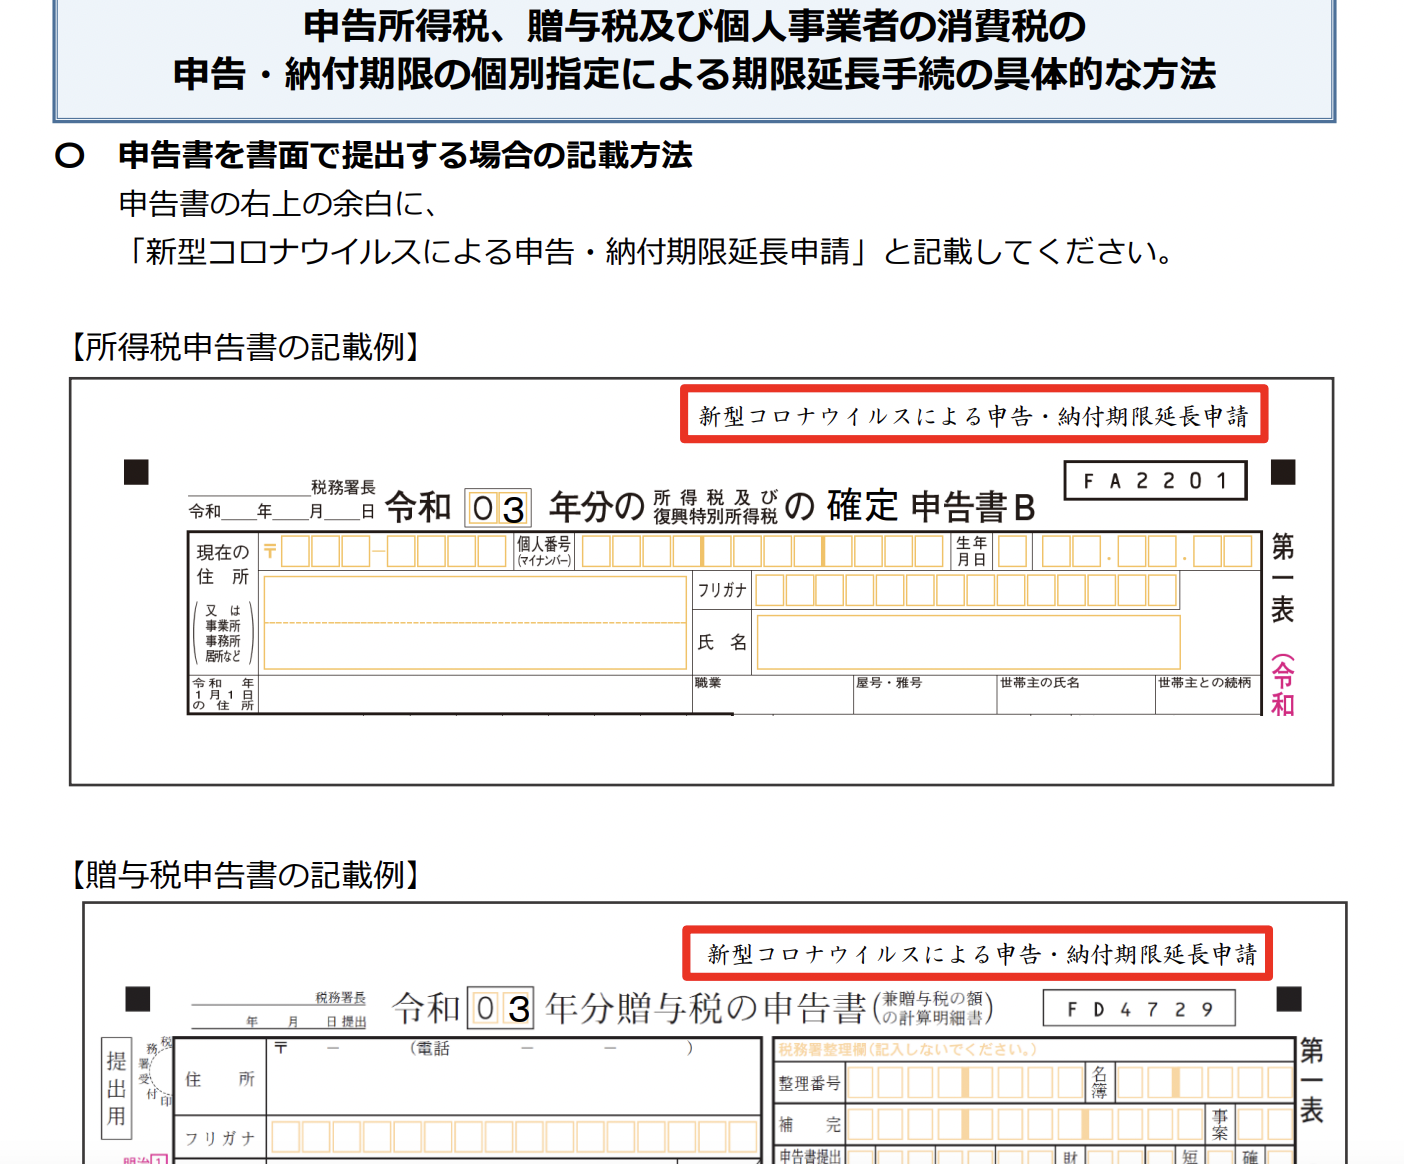 The Japanese Tax Authority announced a conditional extension of the personal tax return deadline.